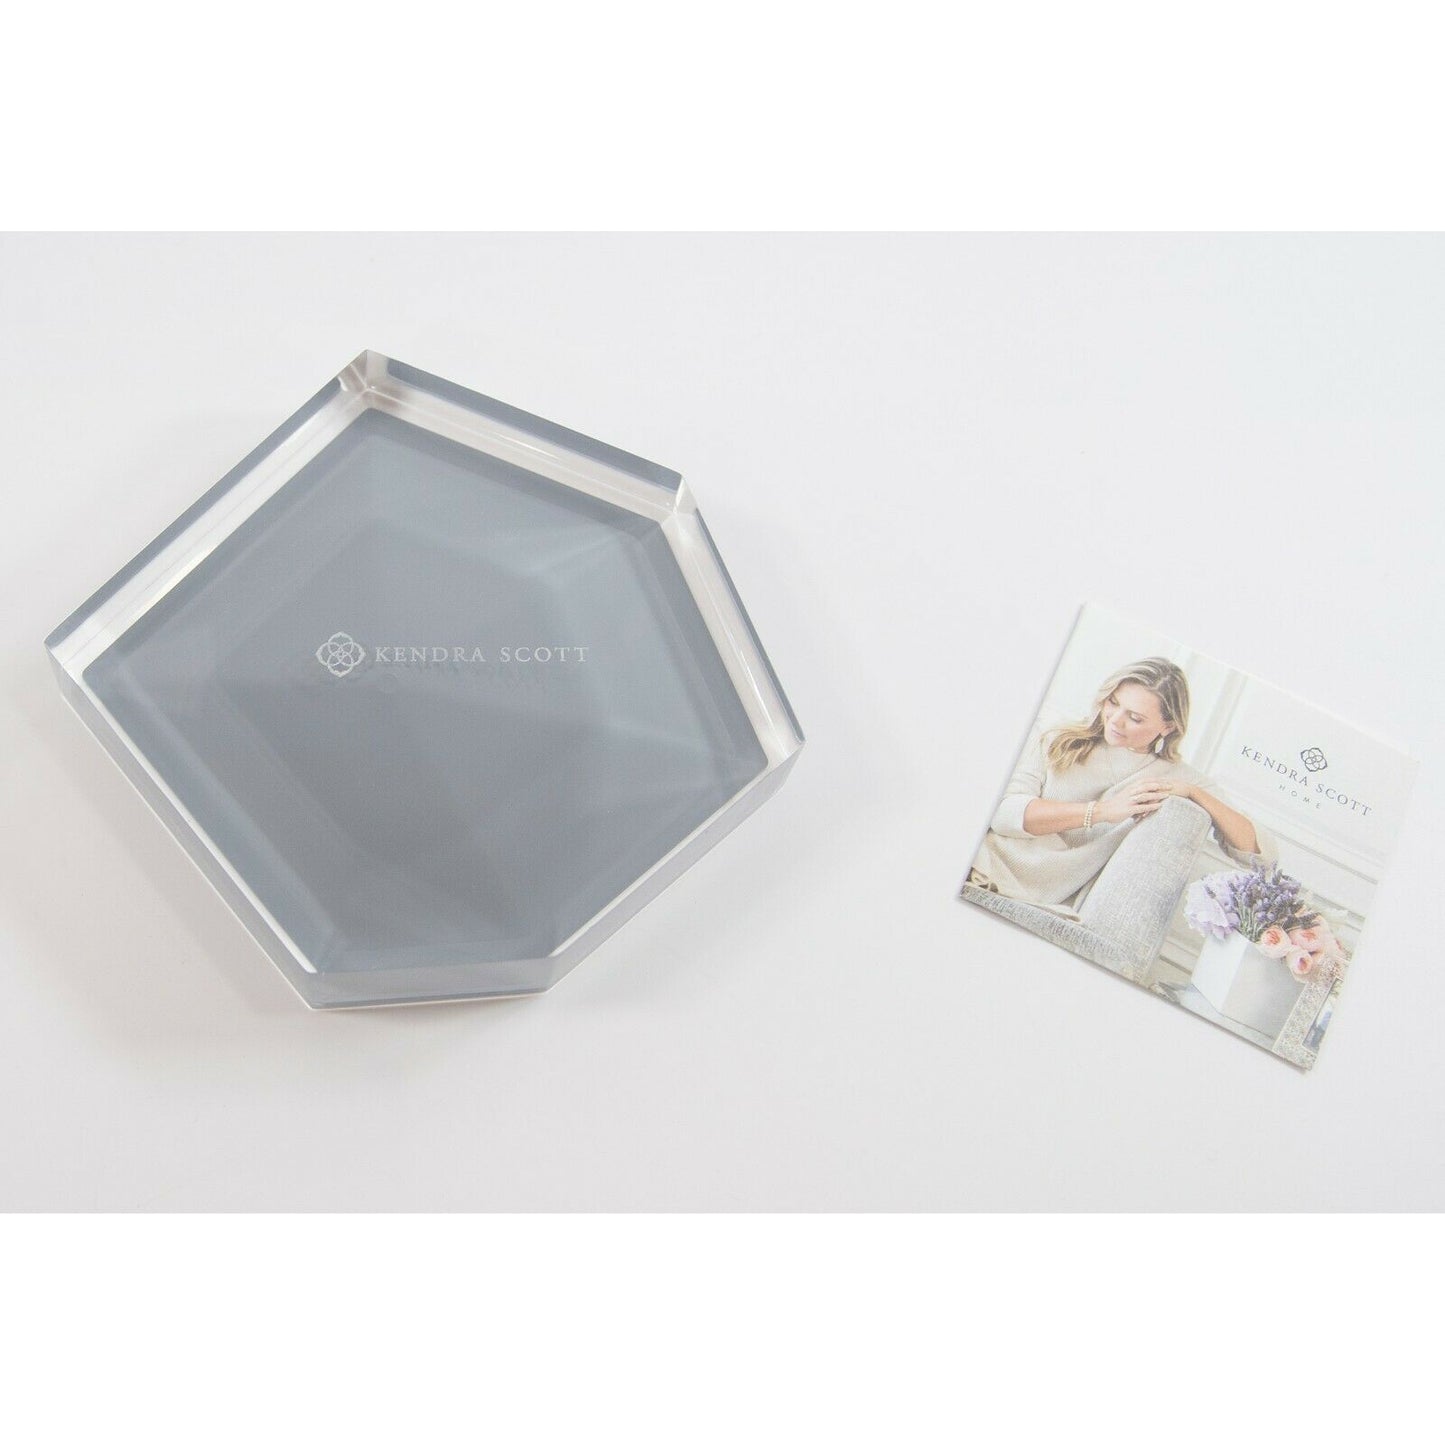 Kendra Scott Antique Silver Faceted Ring Dish Tray NWT